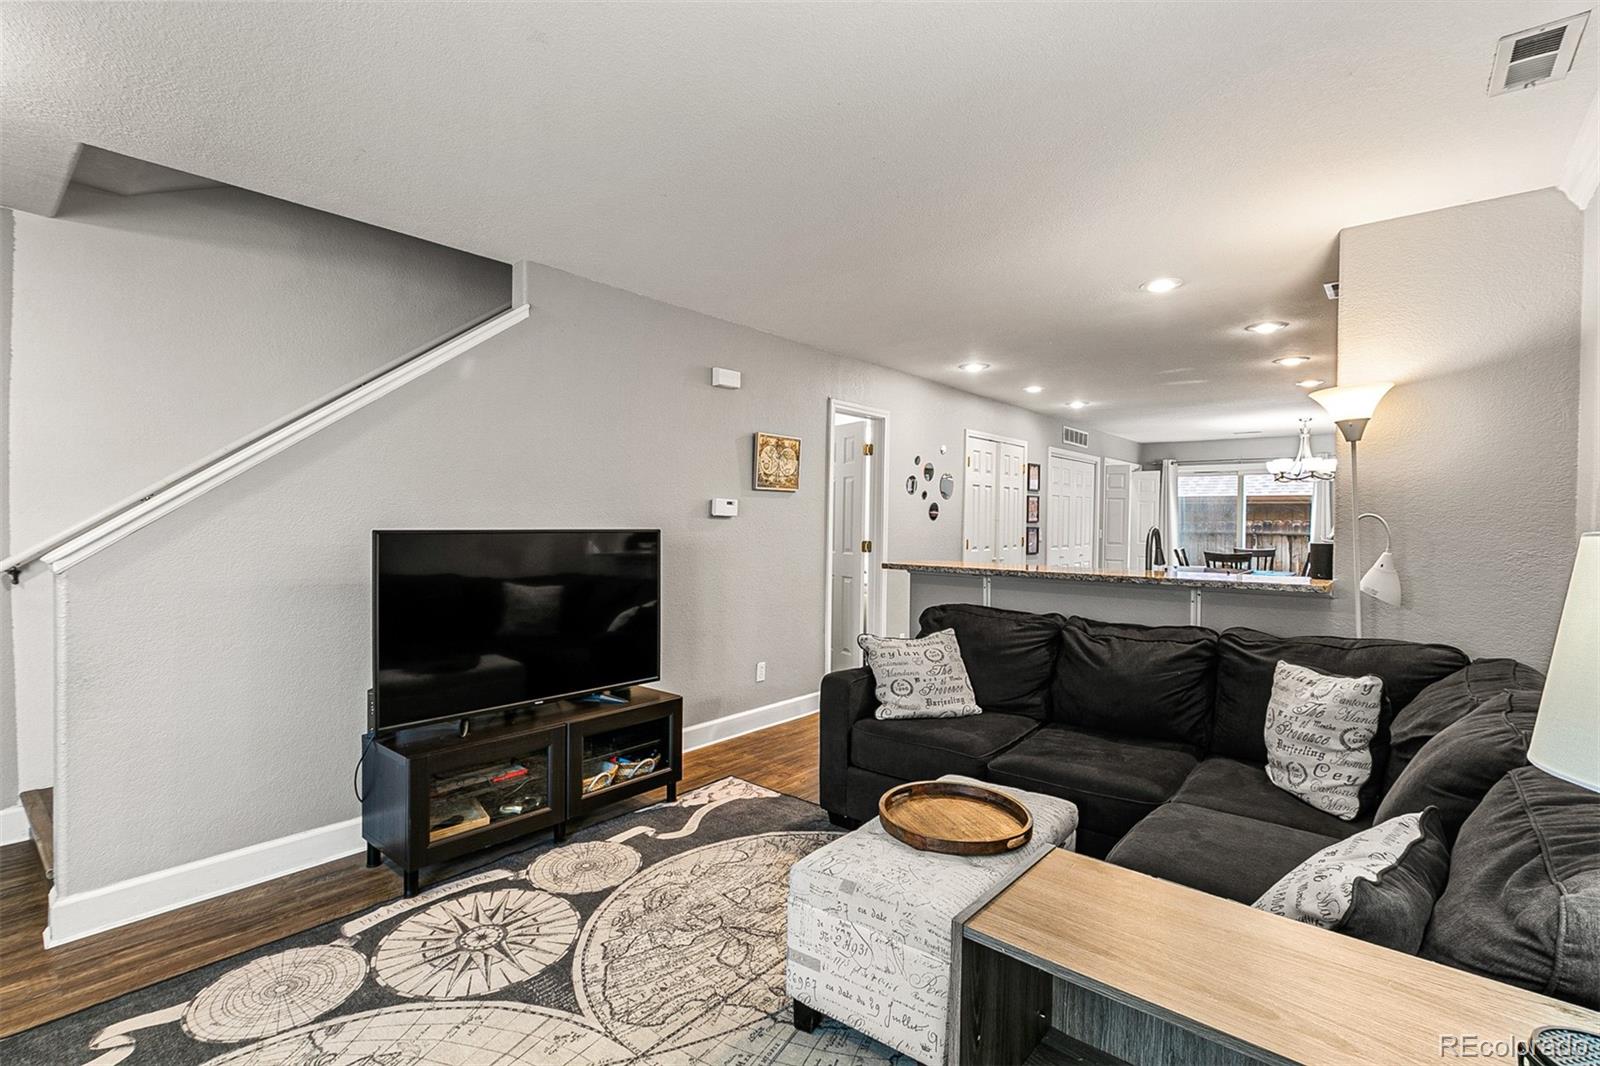 8855 Lowell, Westminster, CO